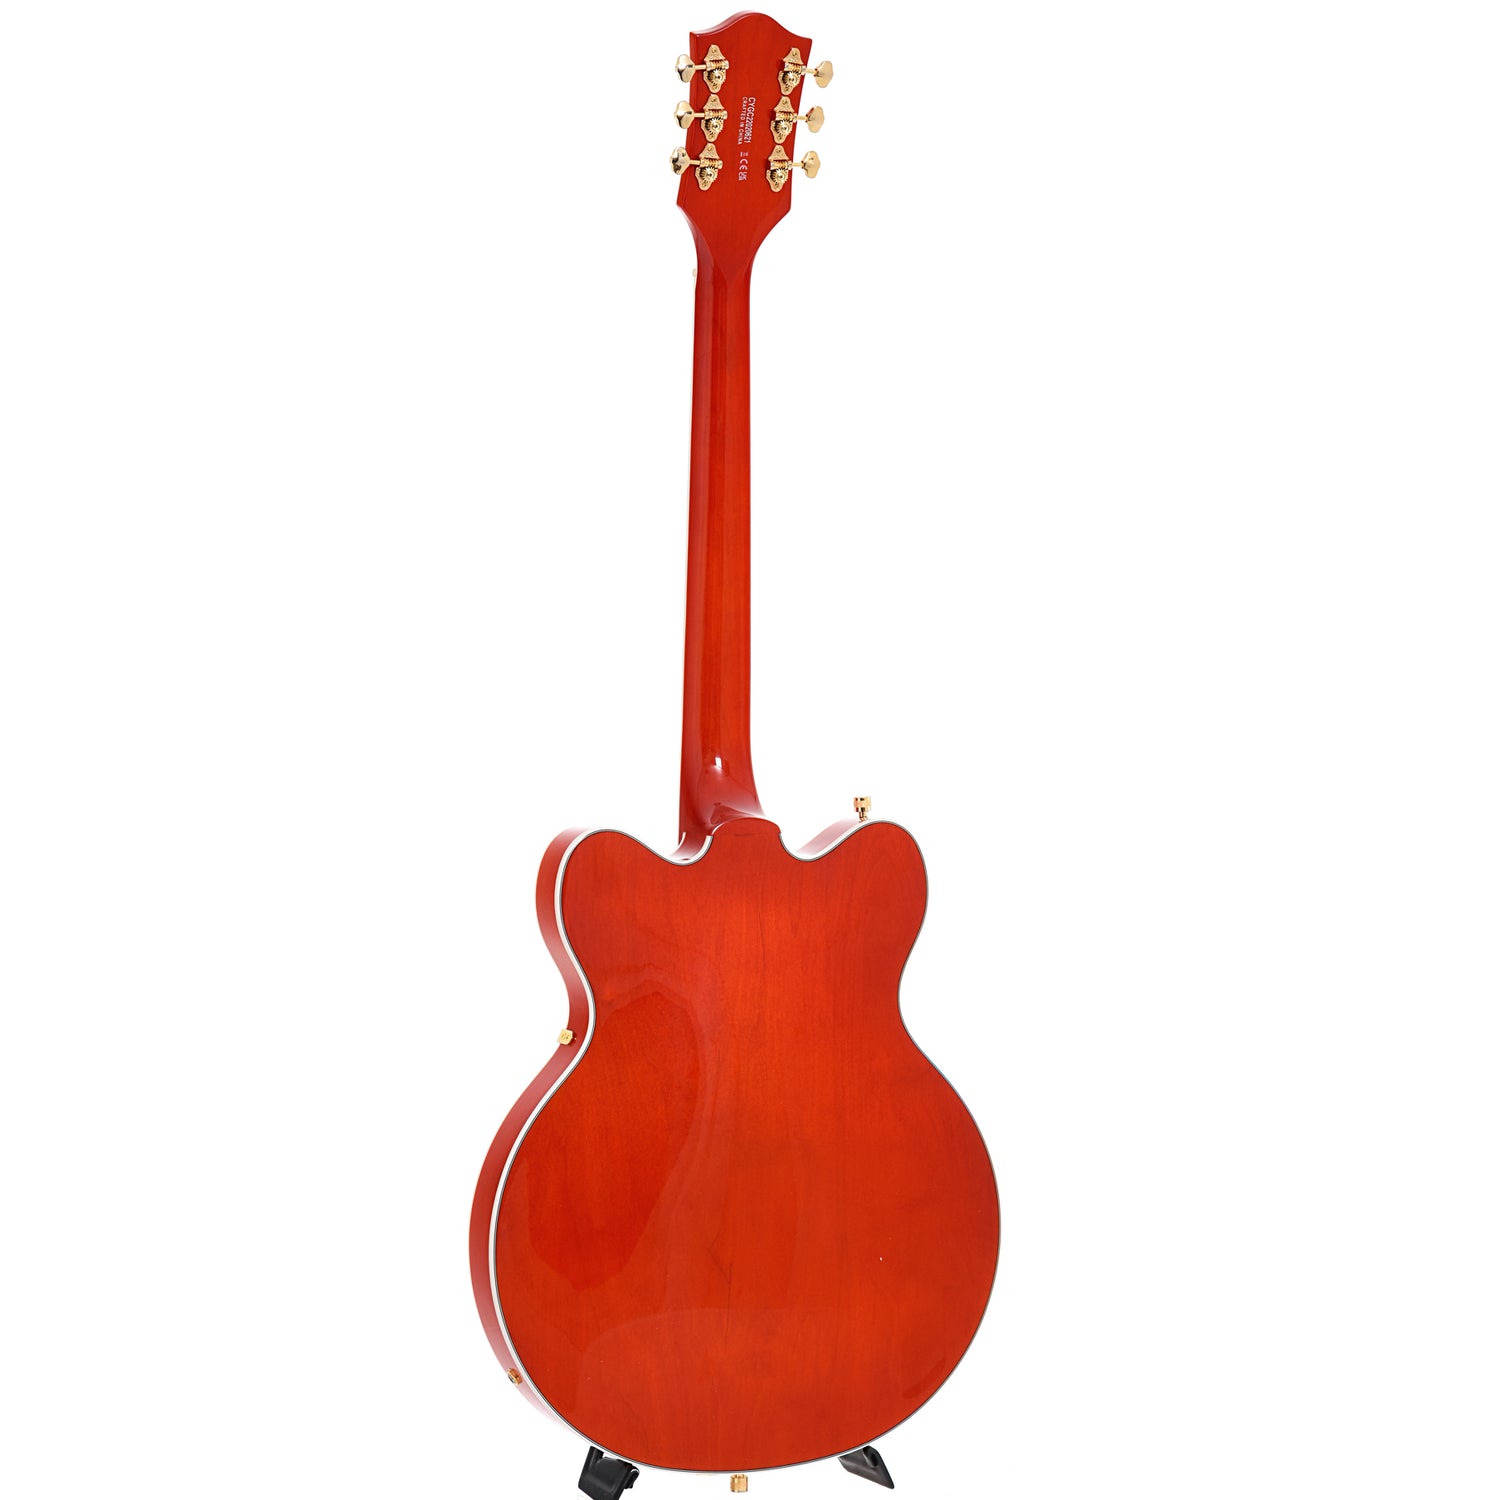 Image 12 of Gretsch G5422TG Electromatic Classic Hollow Body Double Cut with Bigsby, Orange Stain- SKU# G5422TG-ORN : Product Type Hollow Body Electric Guitars : Elderly Instruments